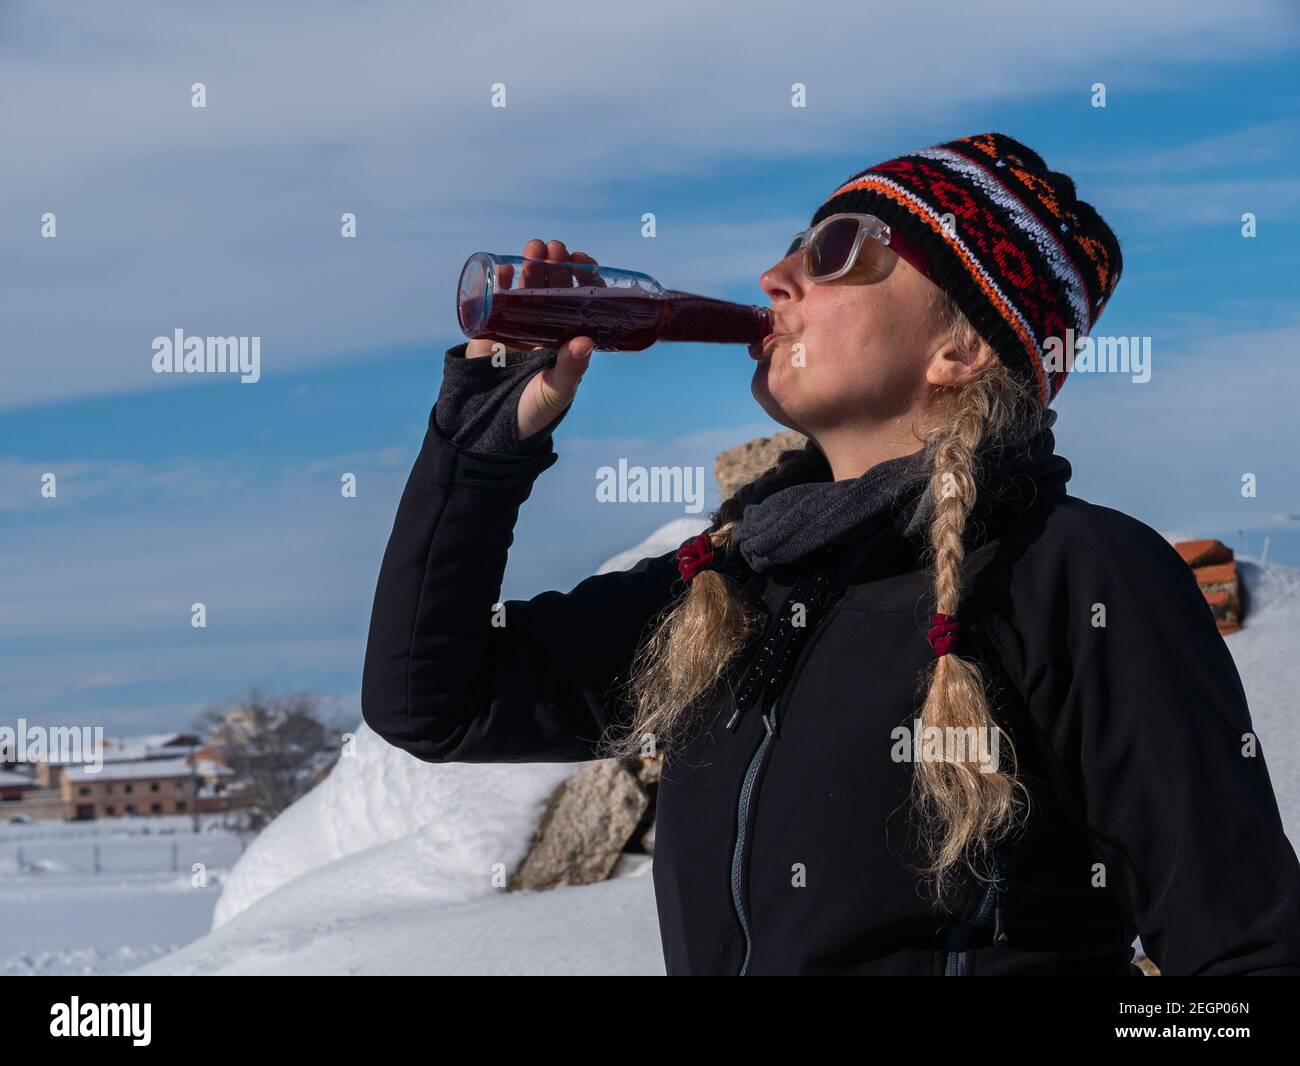 An outdoorsy Caucasian woman in pigtails and winter clothes, drinking soda in a snowy setting Stock Photo